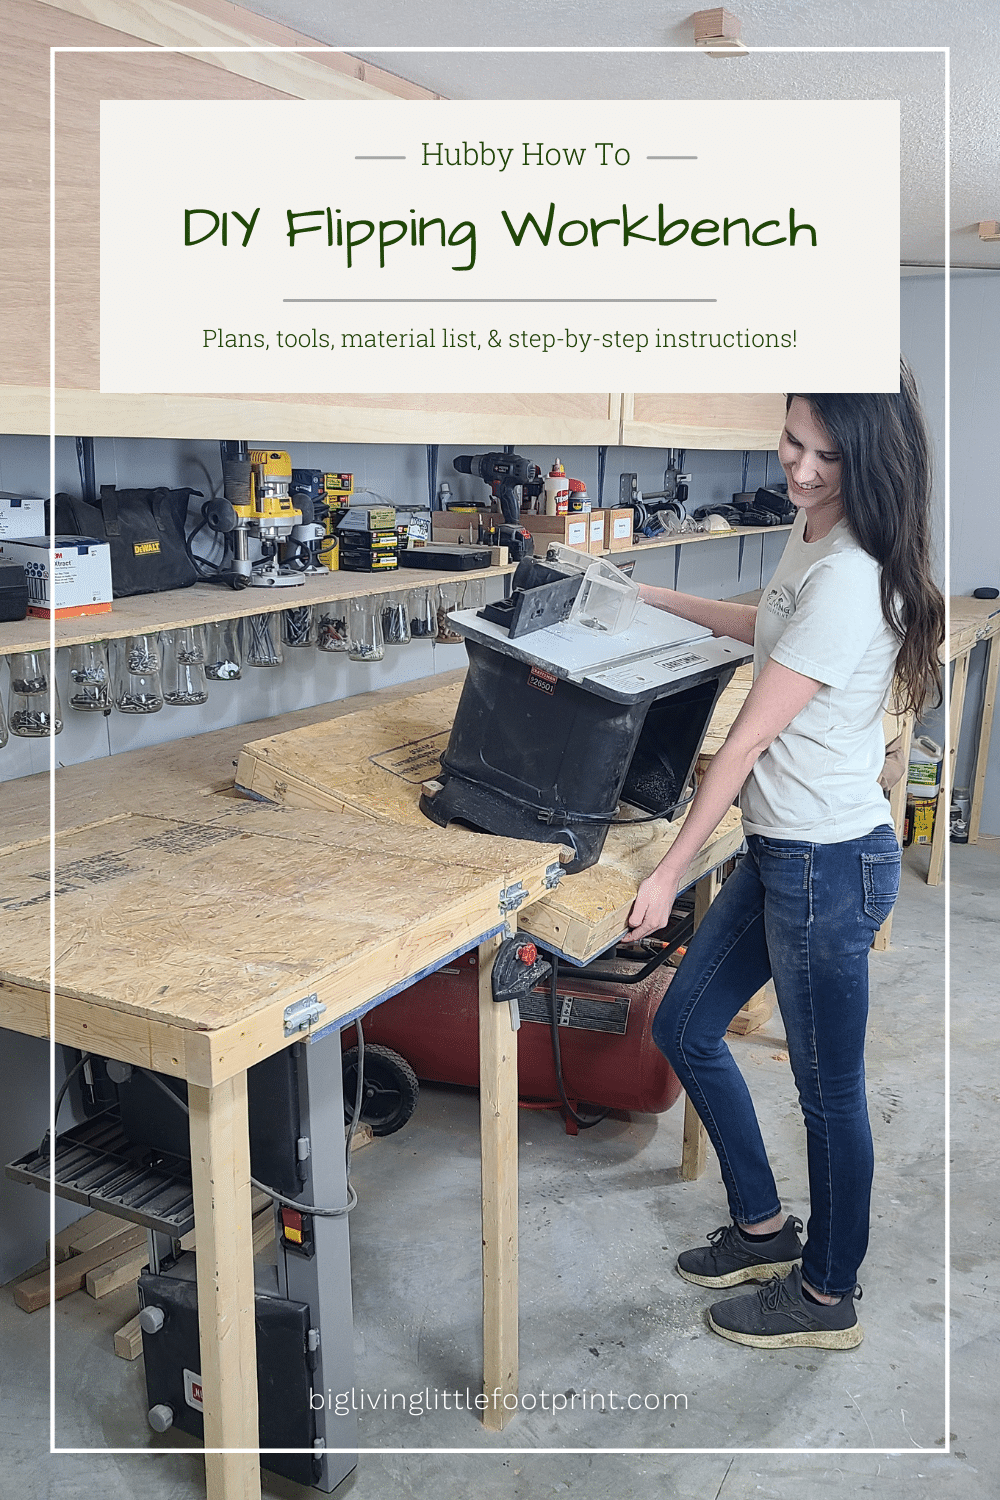 Hubby How To: DIY Flipping Workbench